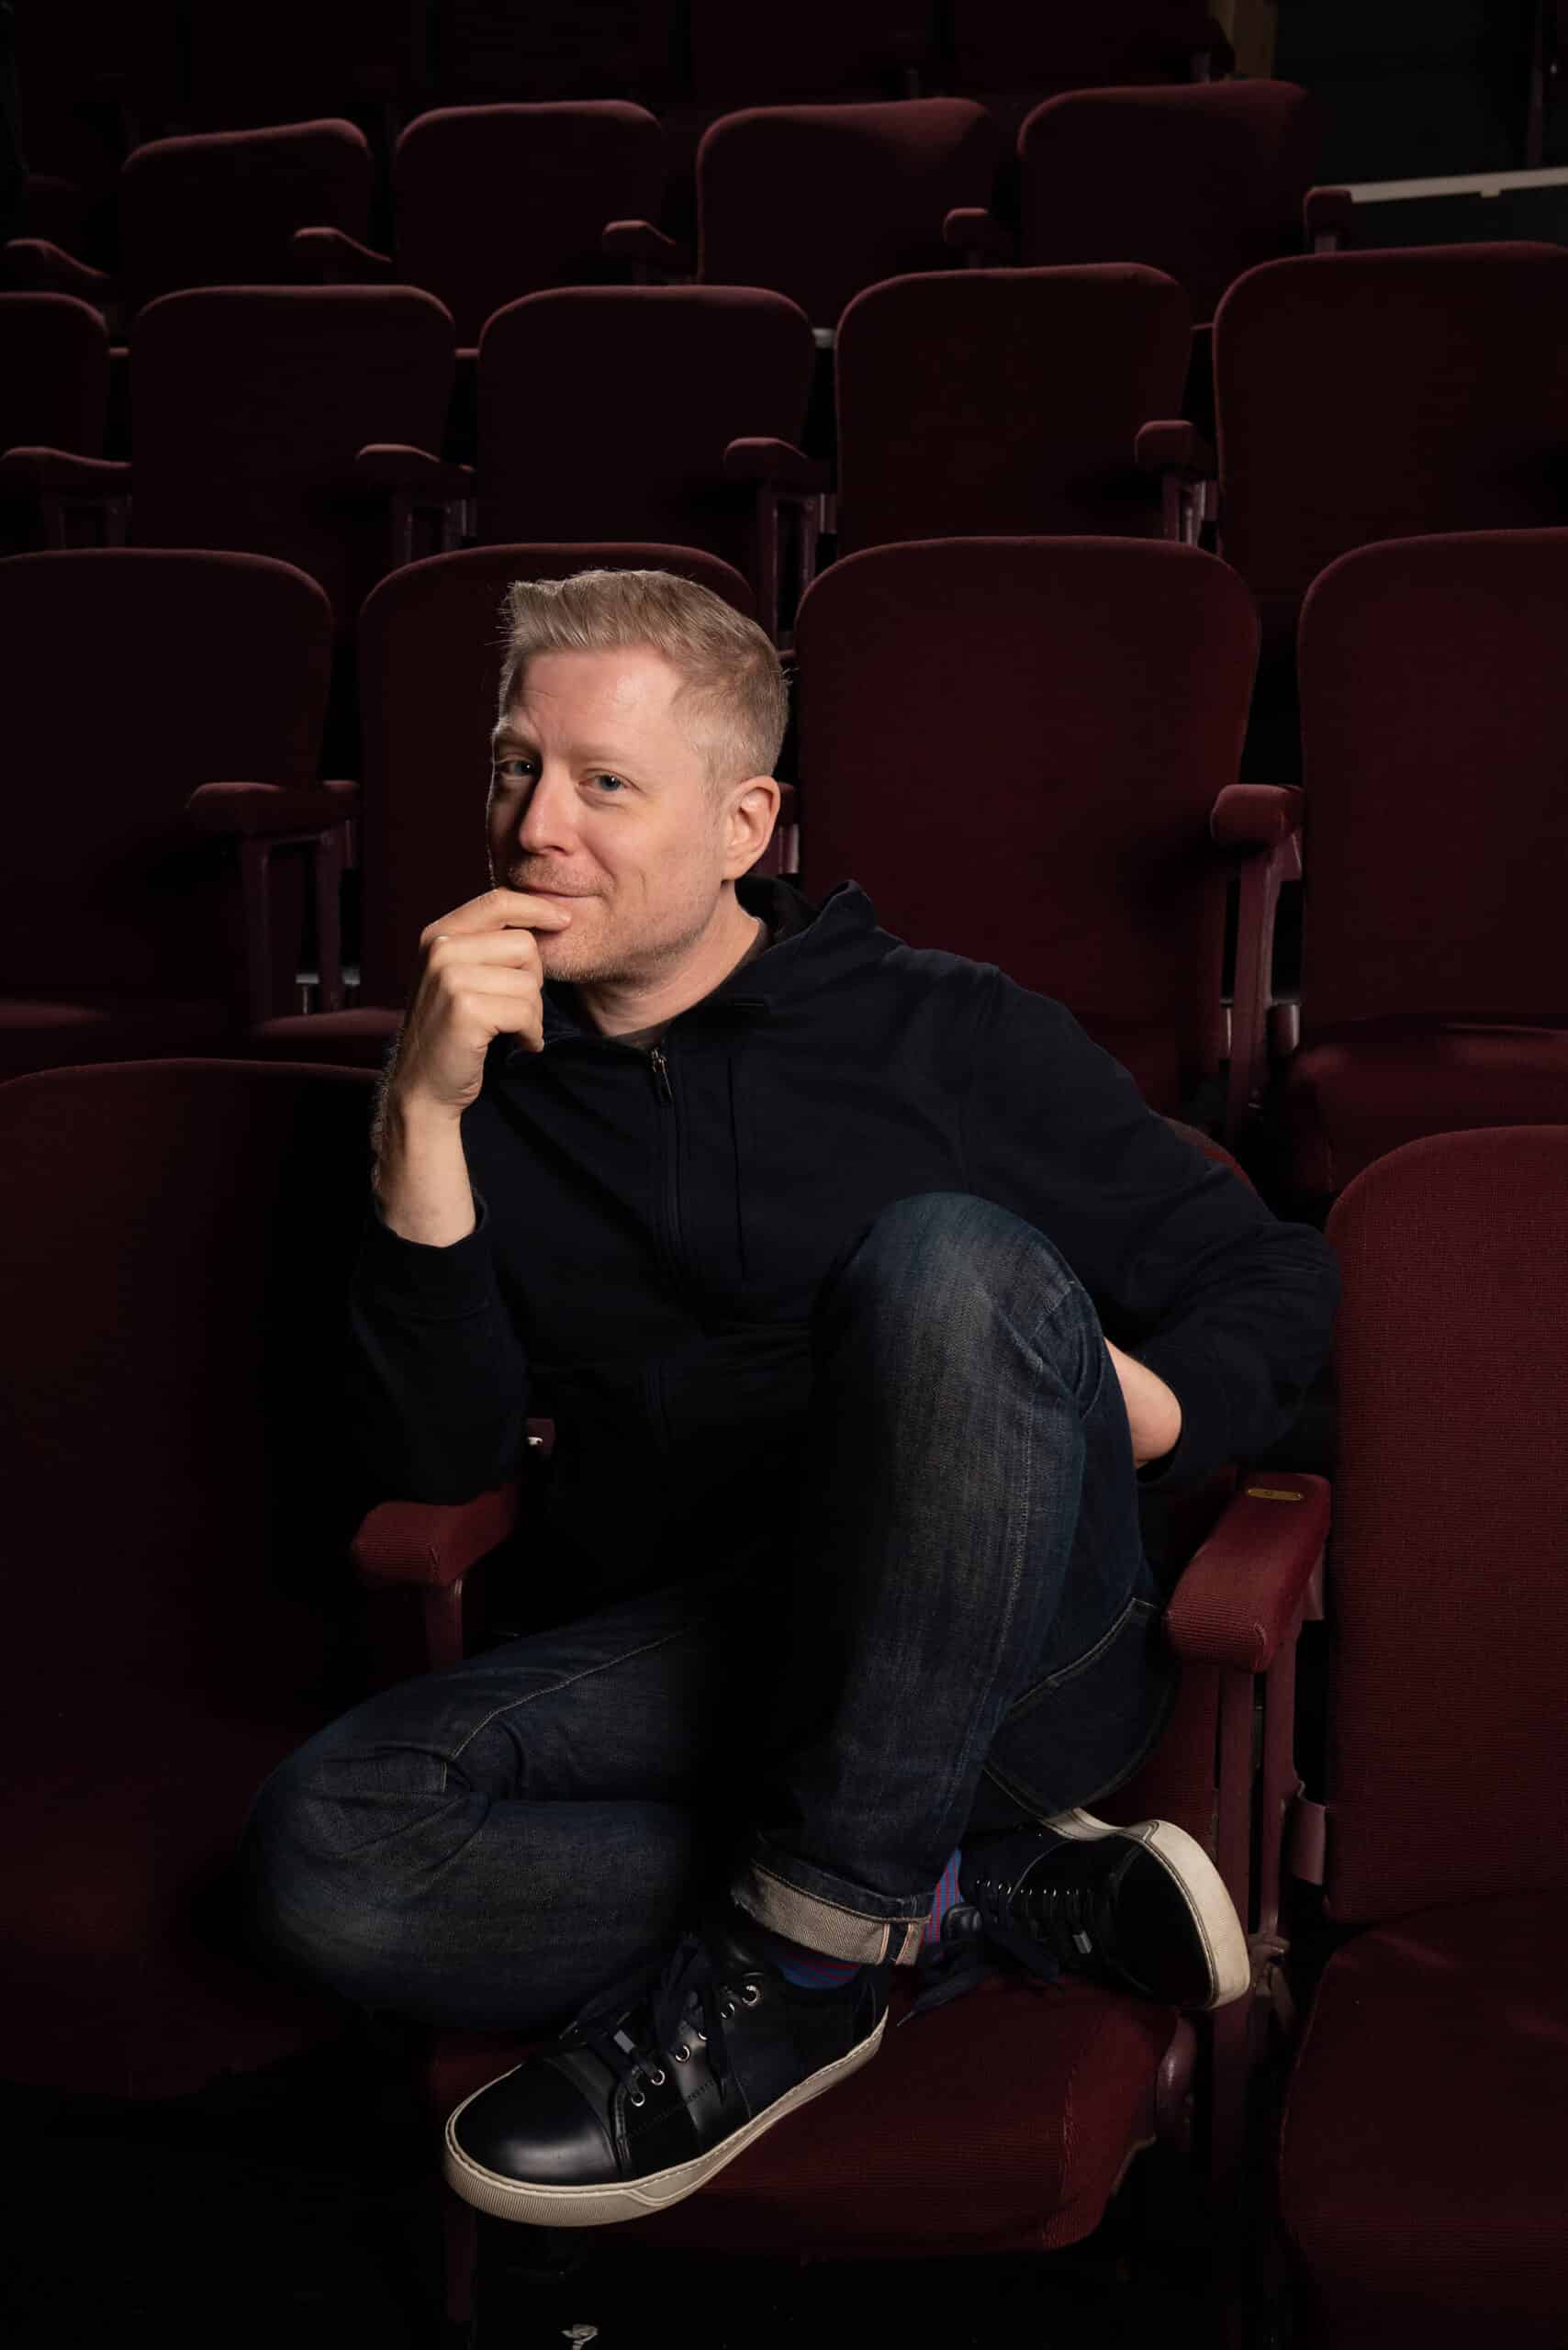 Anthony Rapp sitting in a theatre seat with his hand on his chin and a grin on his face.